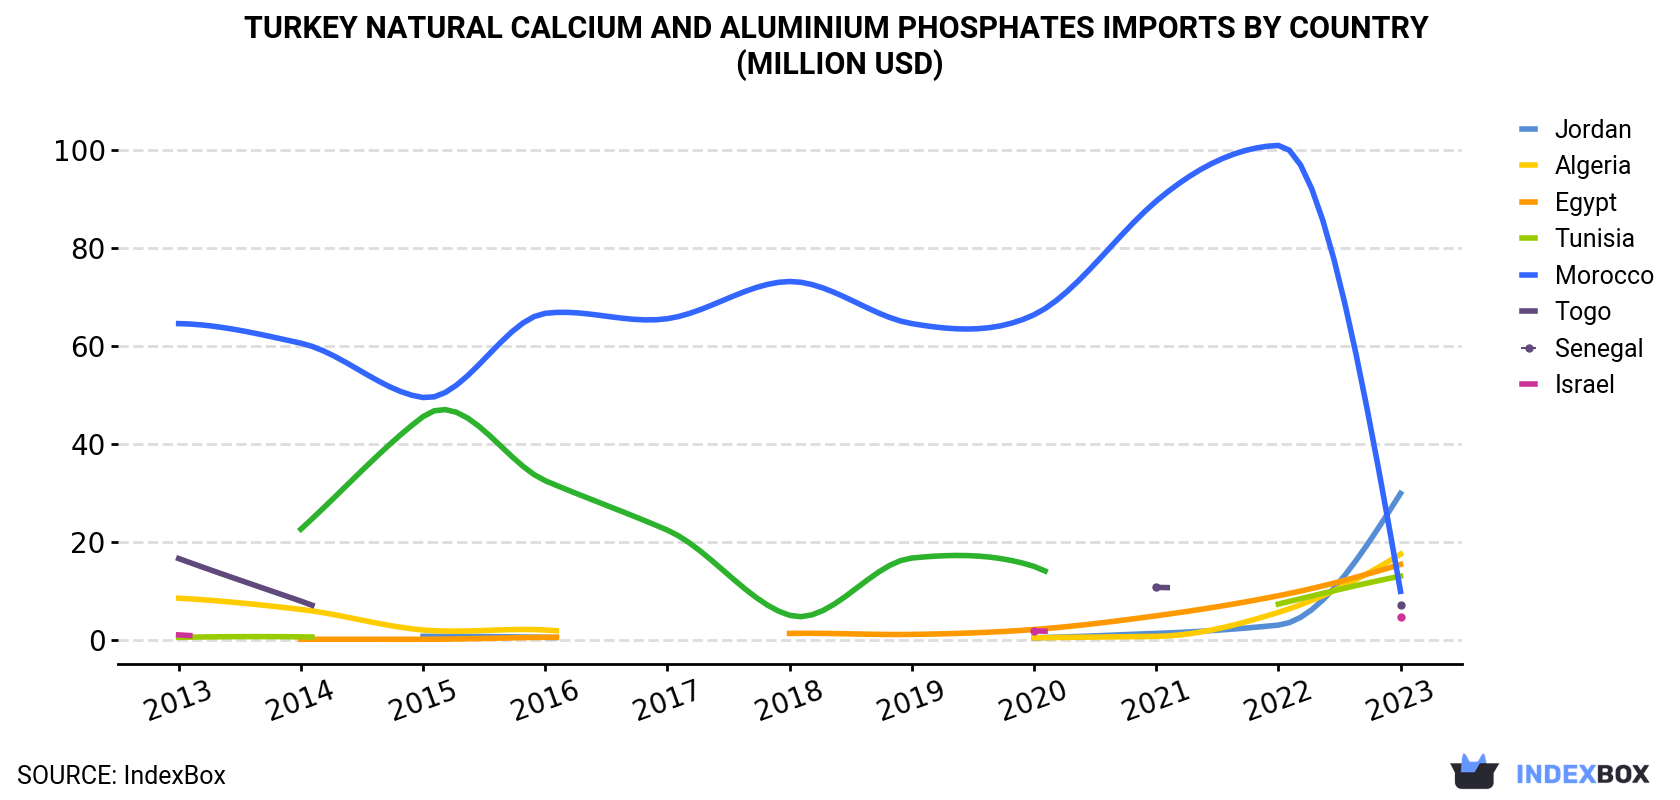 Turkey Natural Calcium And Aluminium Phosphates Imports By Country (Million USD)